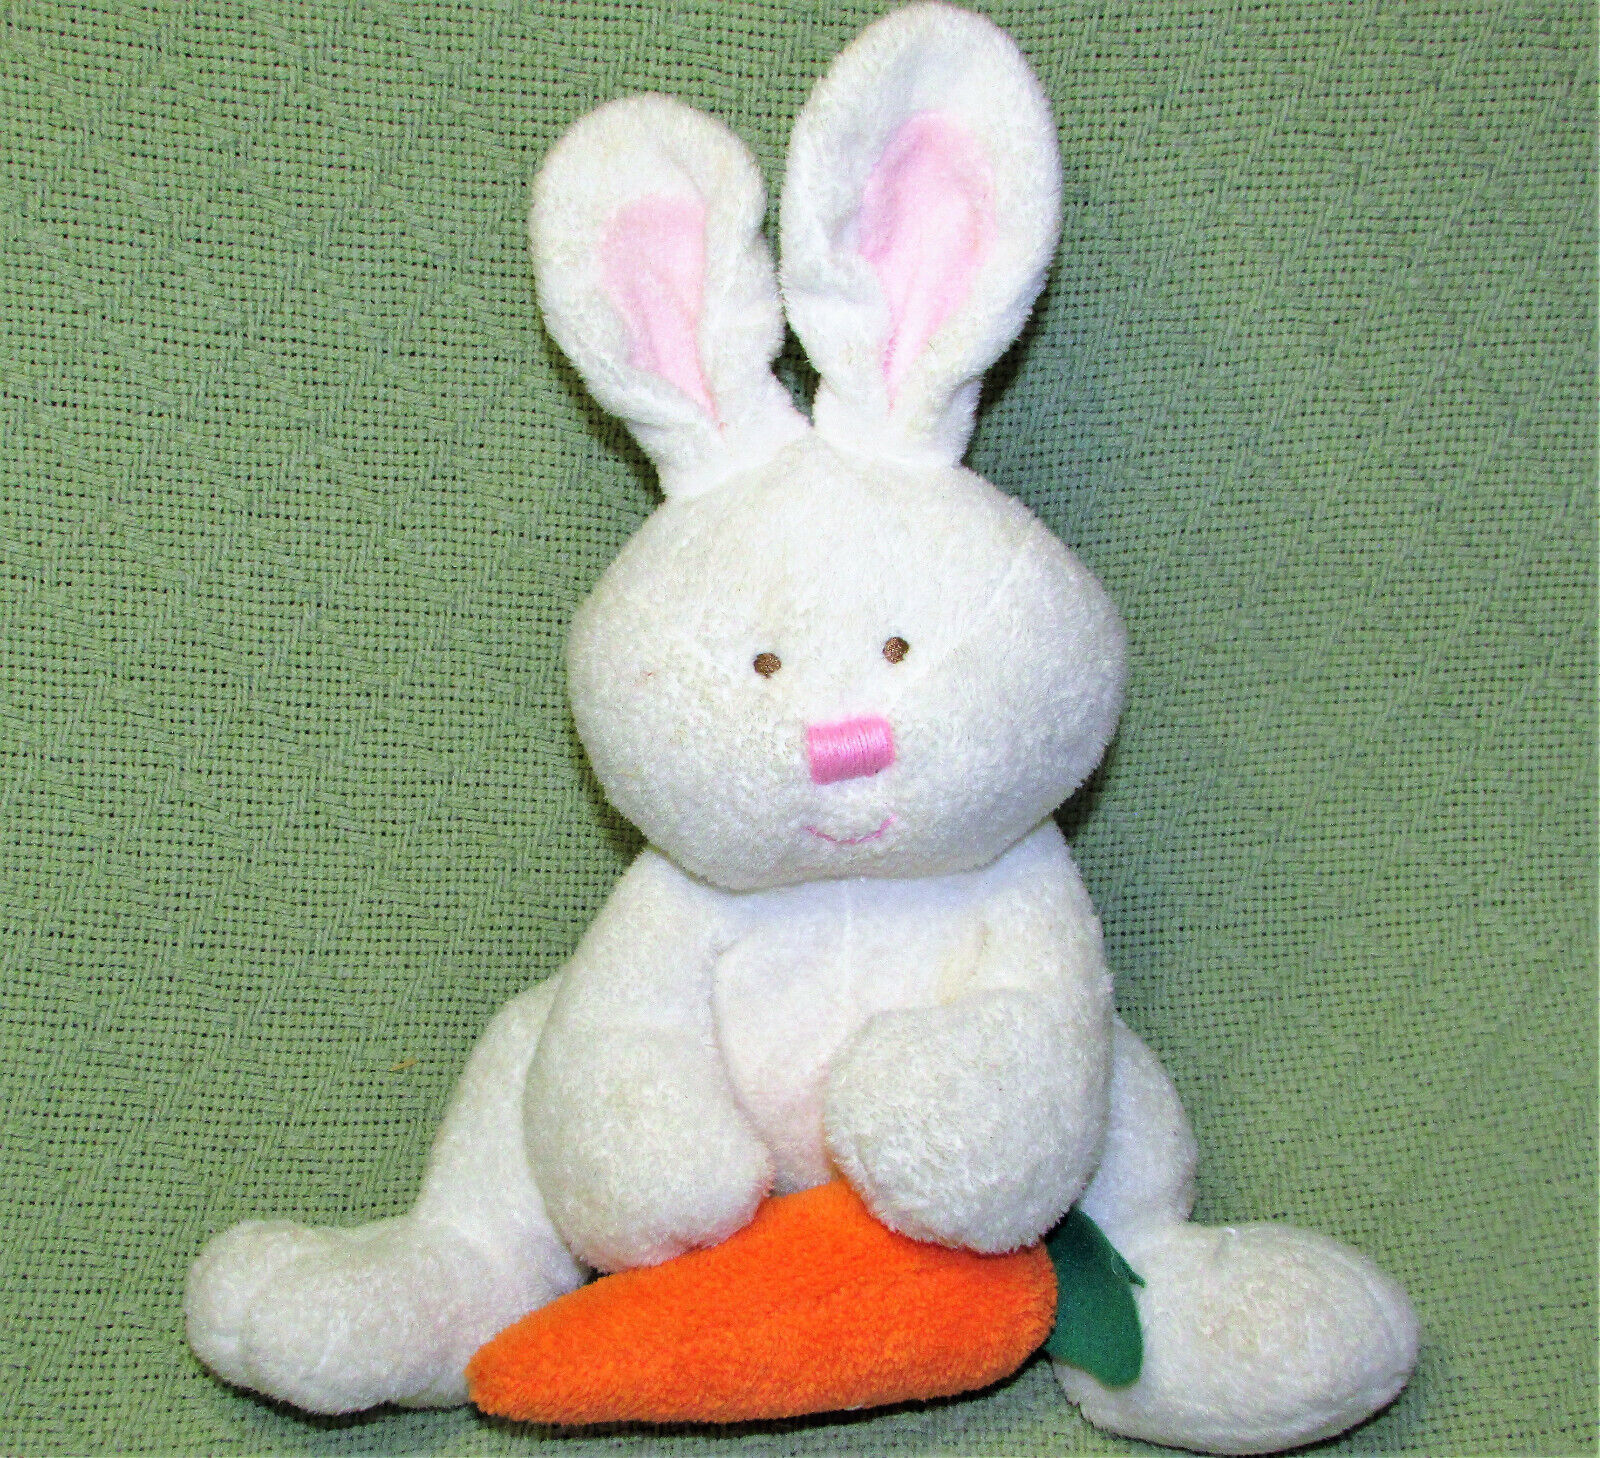 TY PLUFFIES WHITE BUNNY SNACKERS PLUSH STUFFED ANIMAL RABBIT WIT CARROT BABY TOY - $8.99